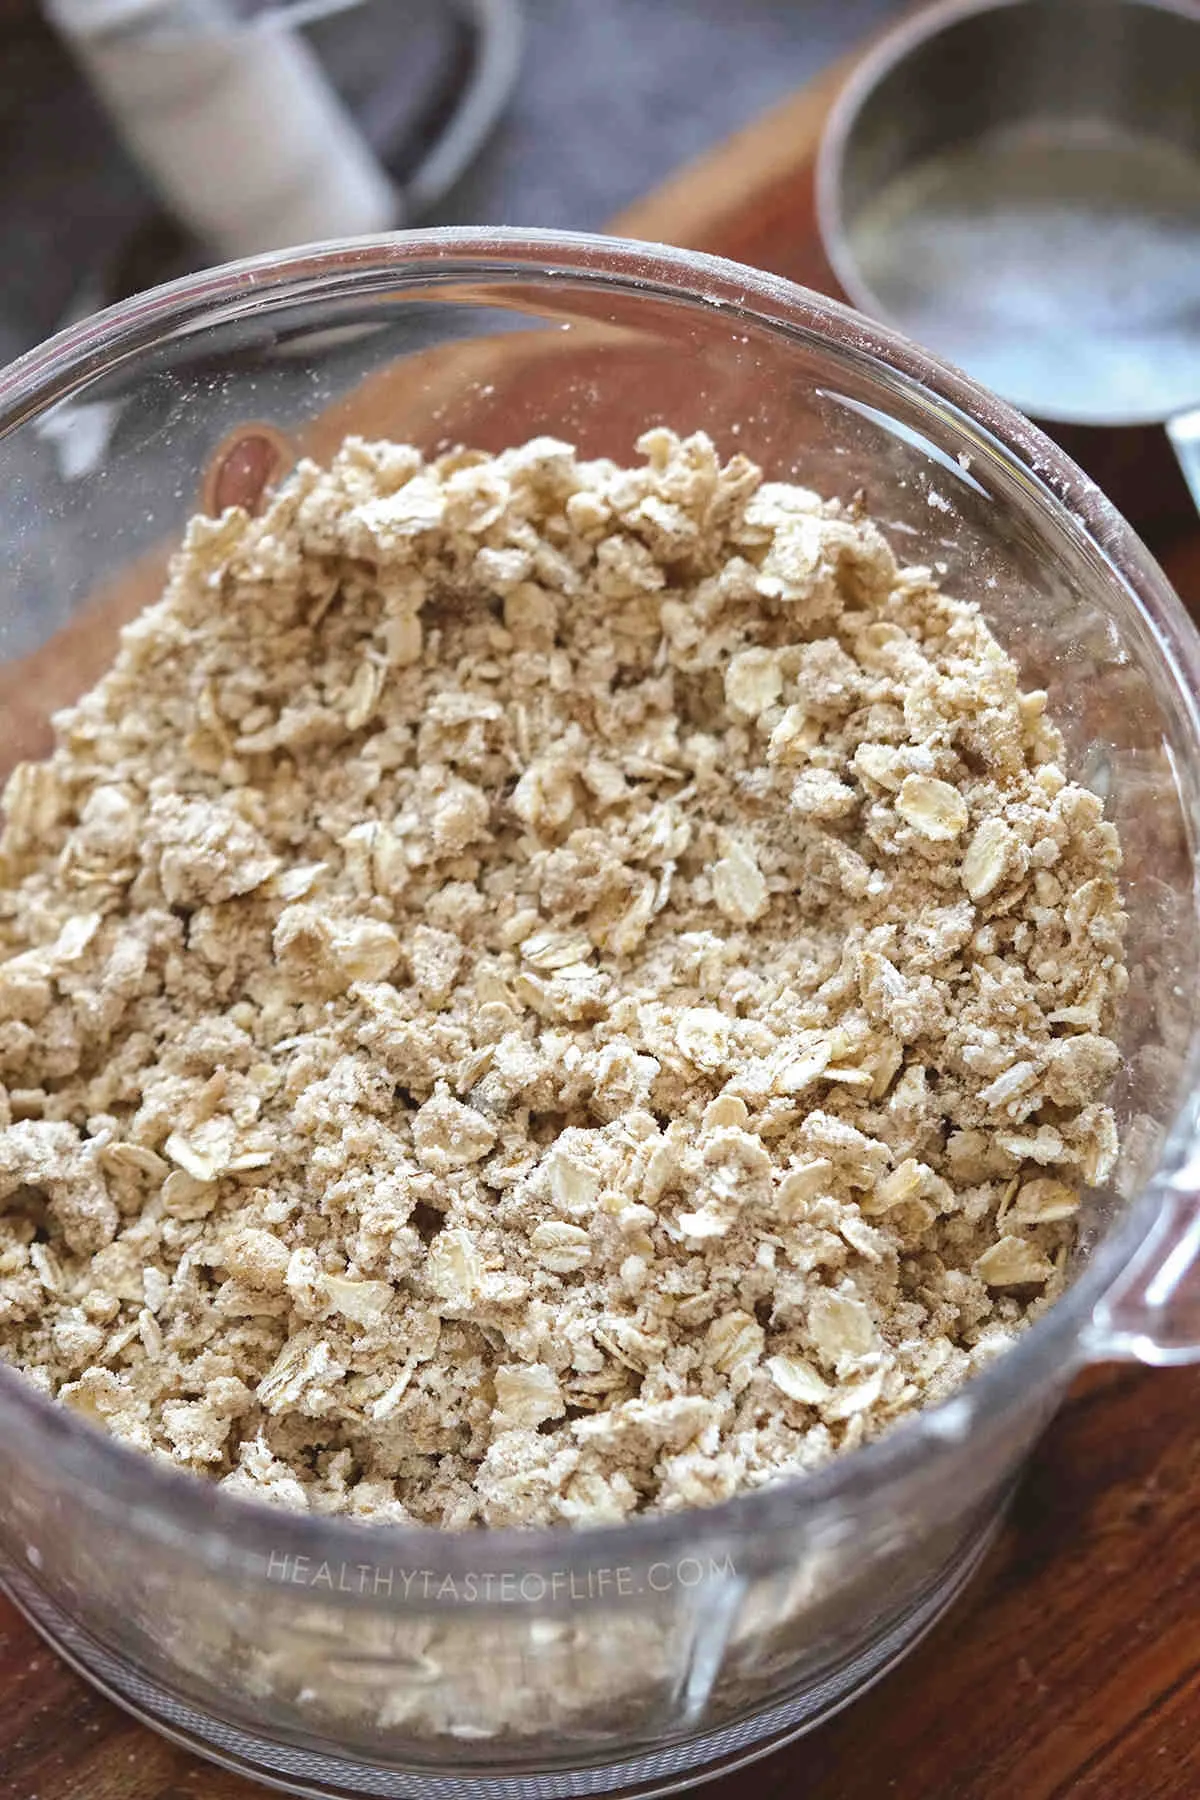 Unbaked oatmeal crumble to be used as topping.